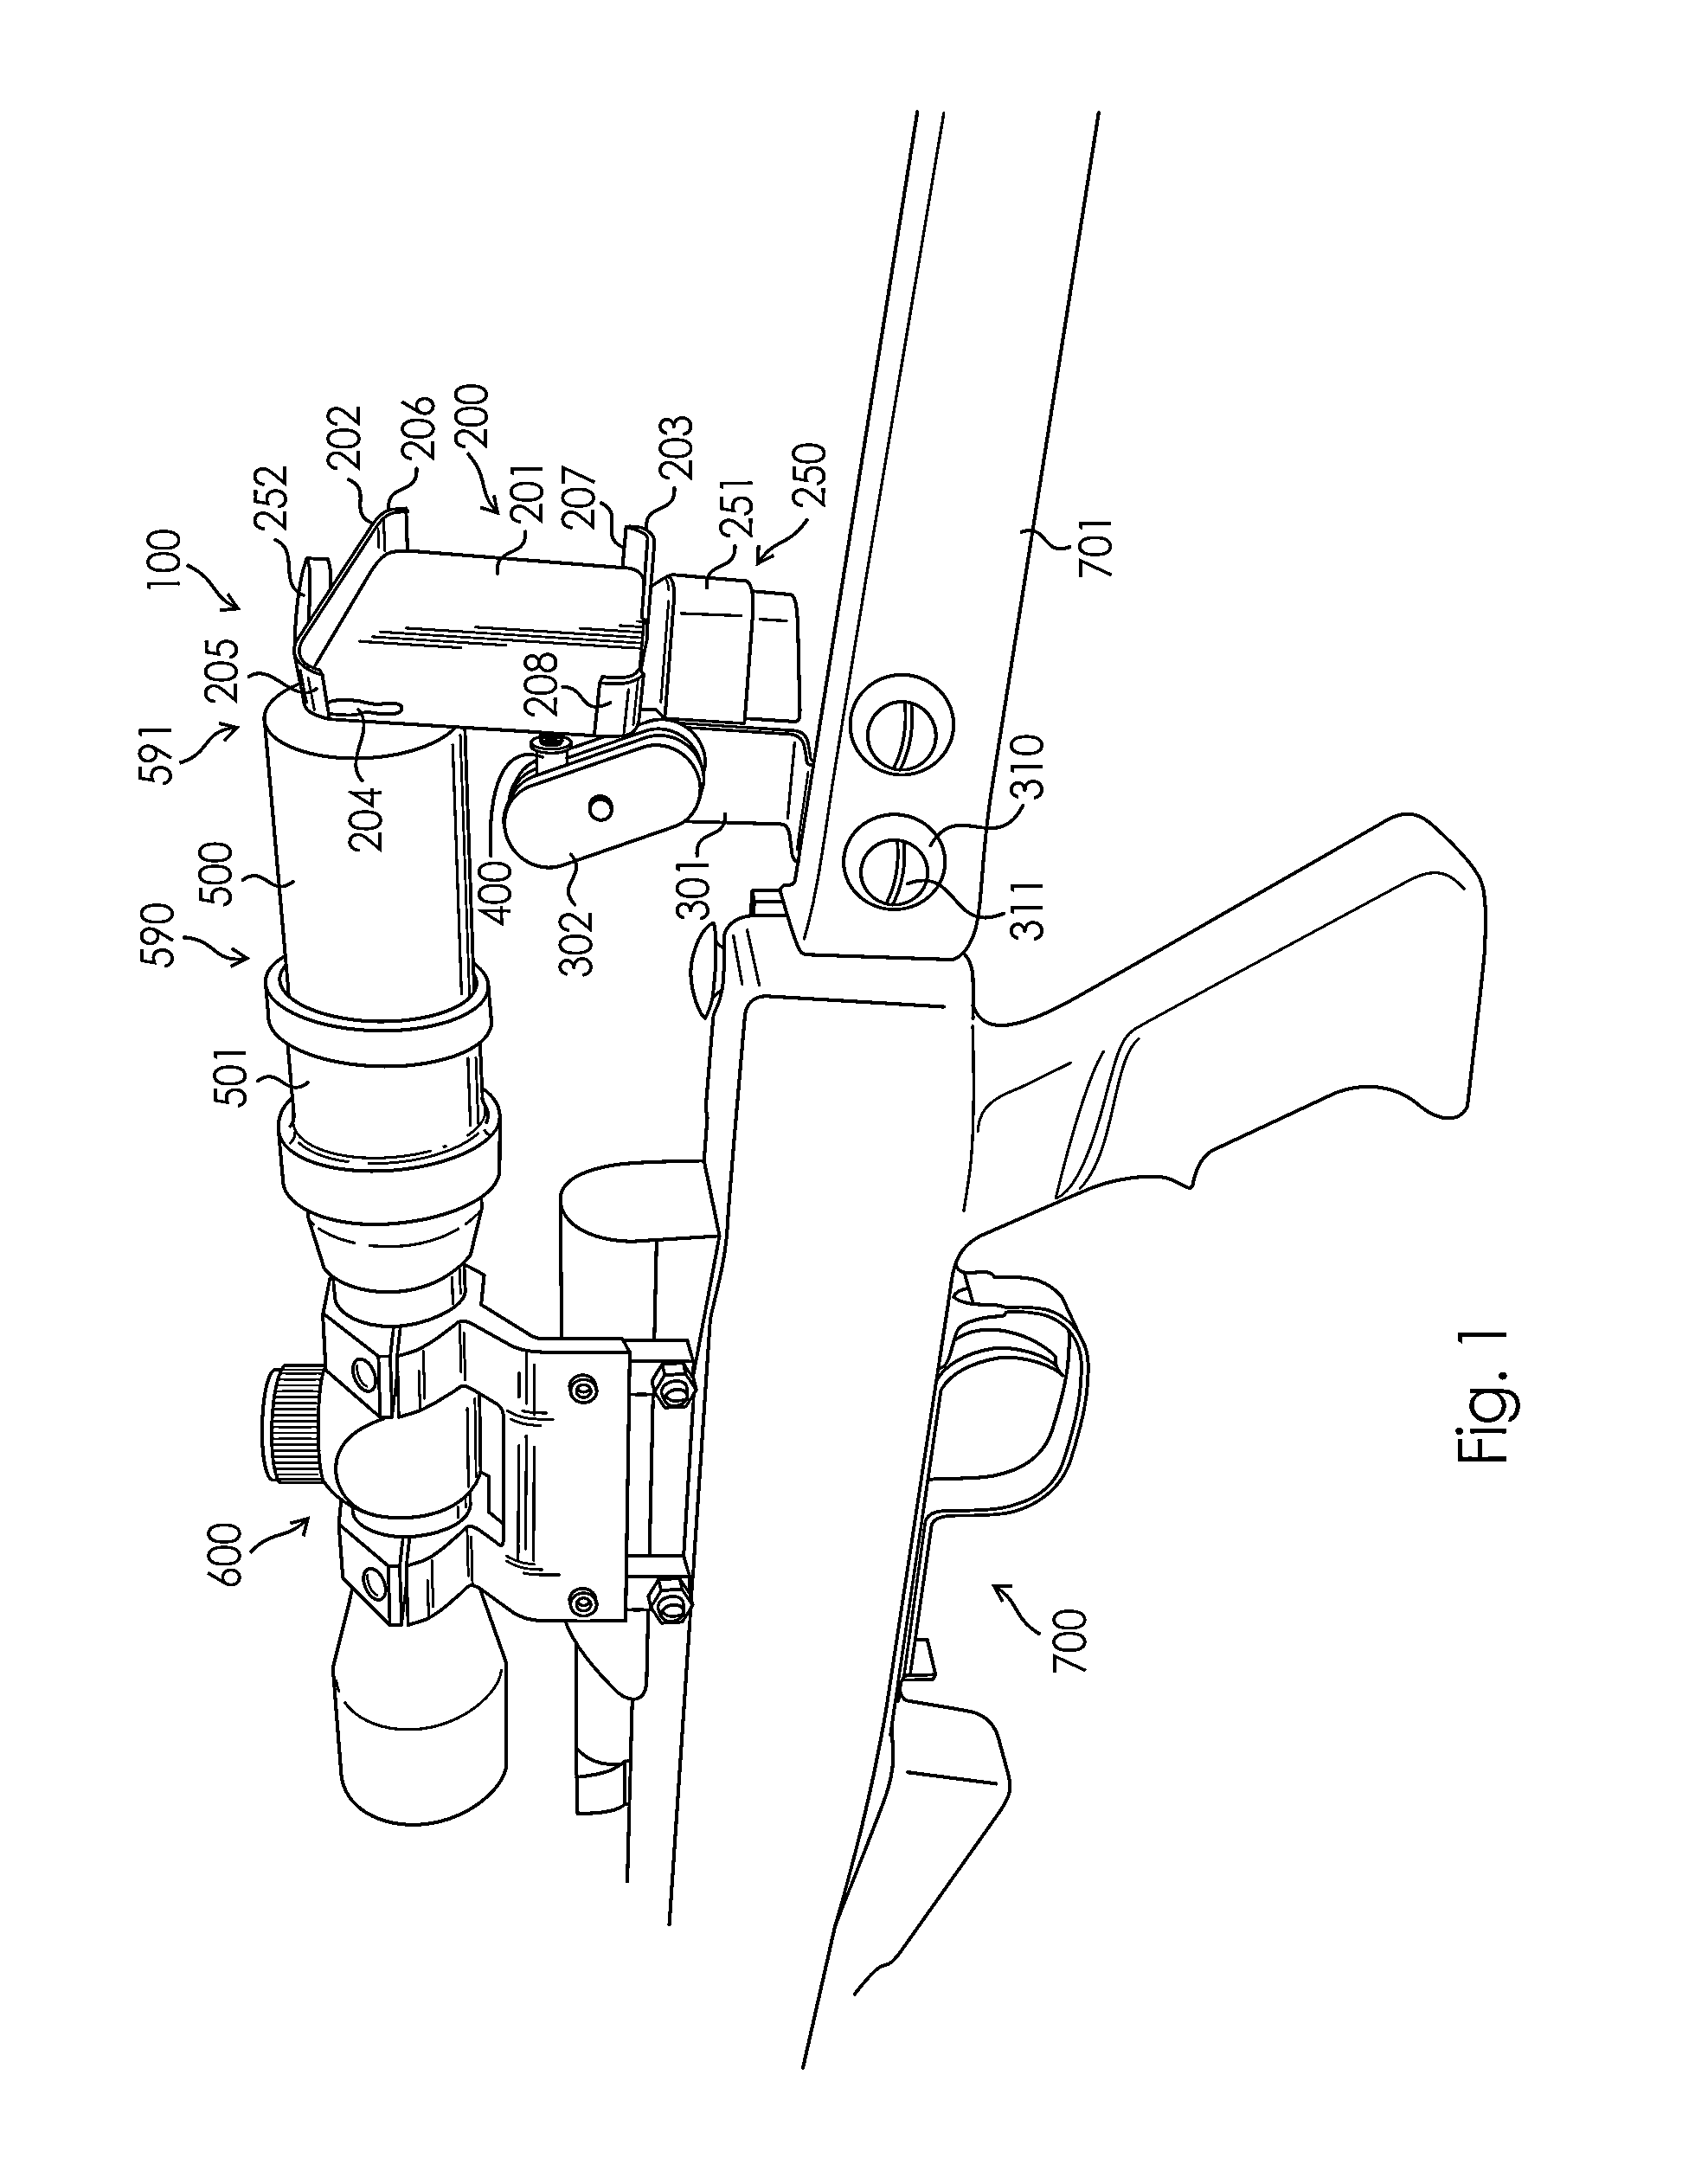 Camera Mount Apparatus and System for a Scope